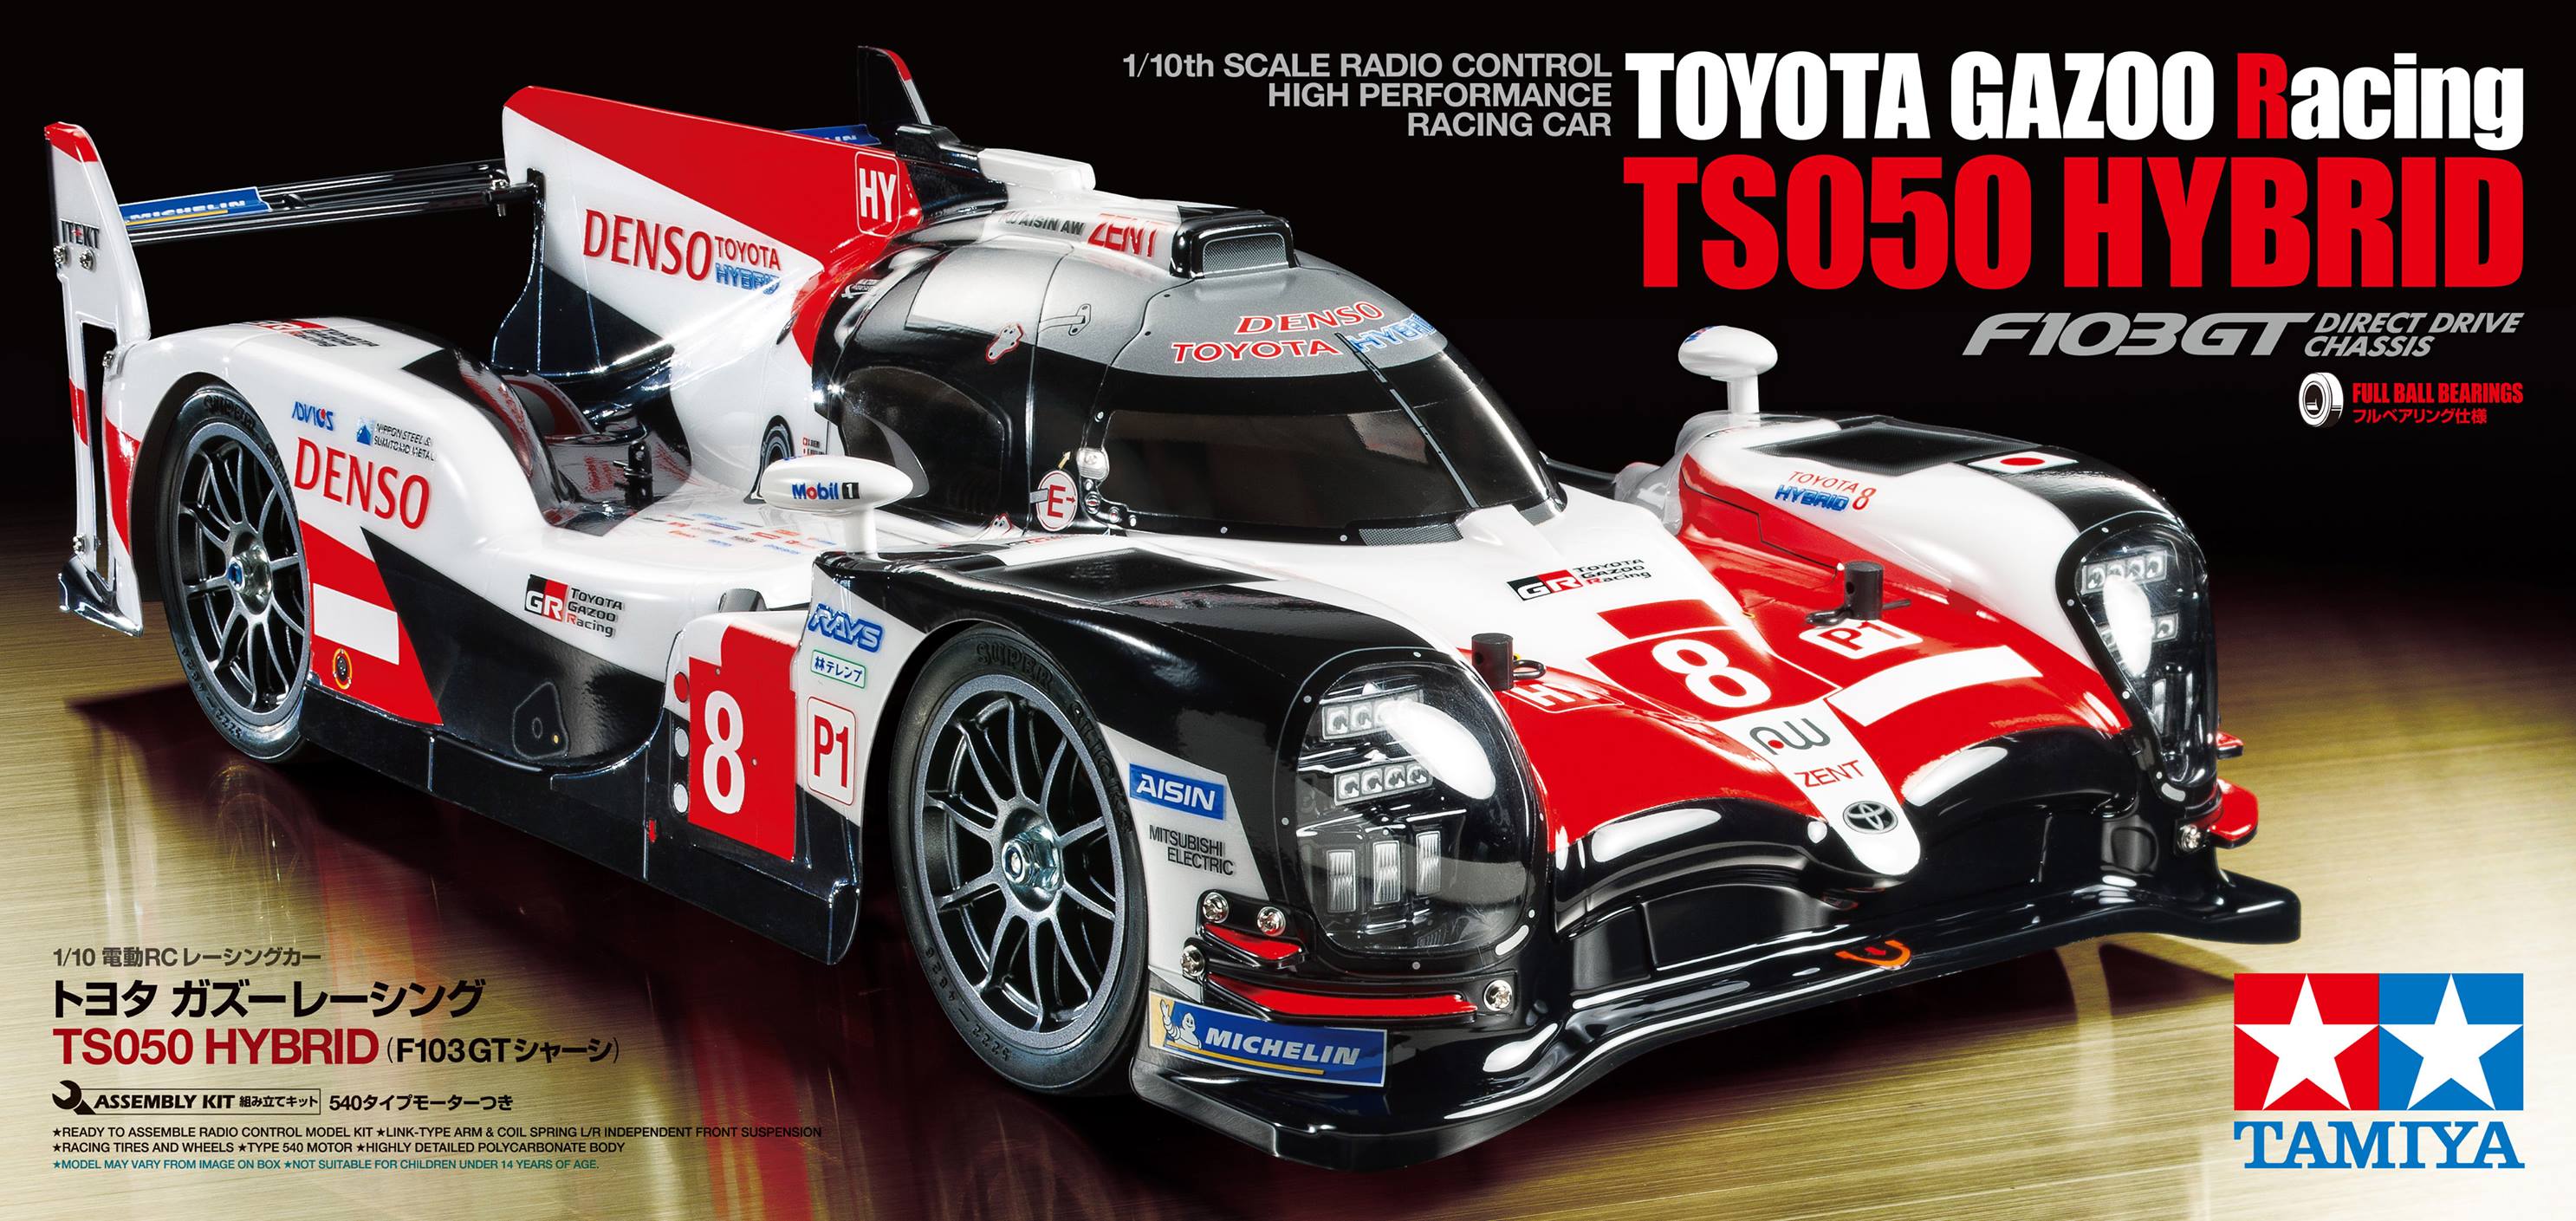 First photos and details of upcoming Tamiya 58665 1/10 RC Toyota